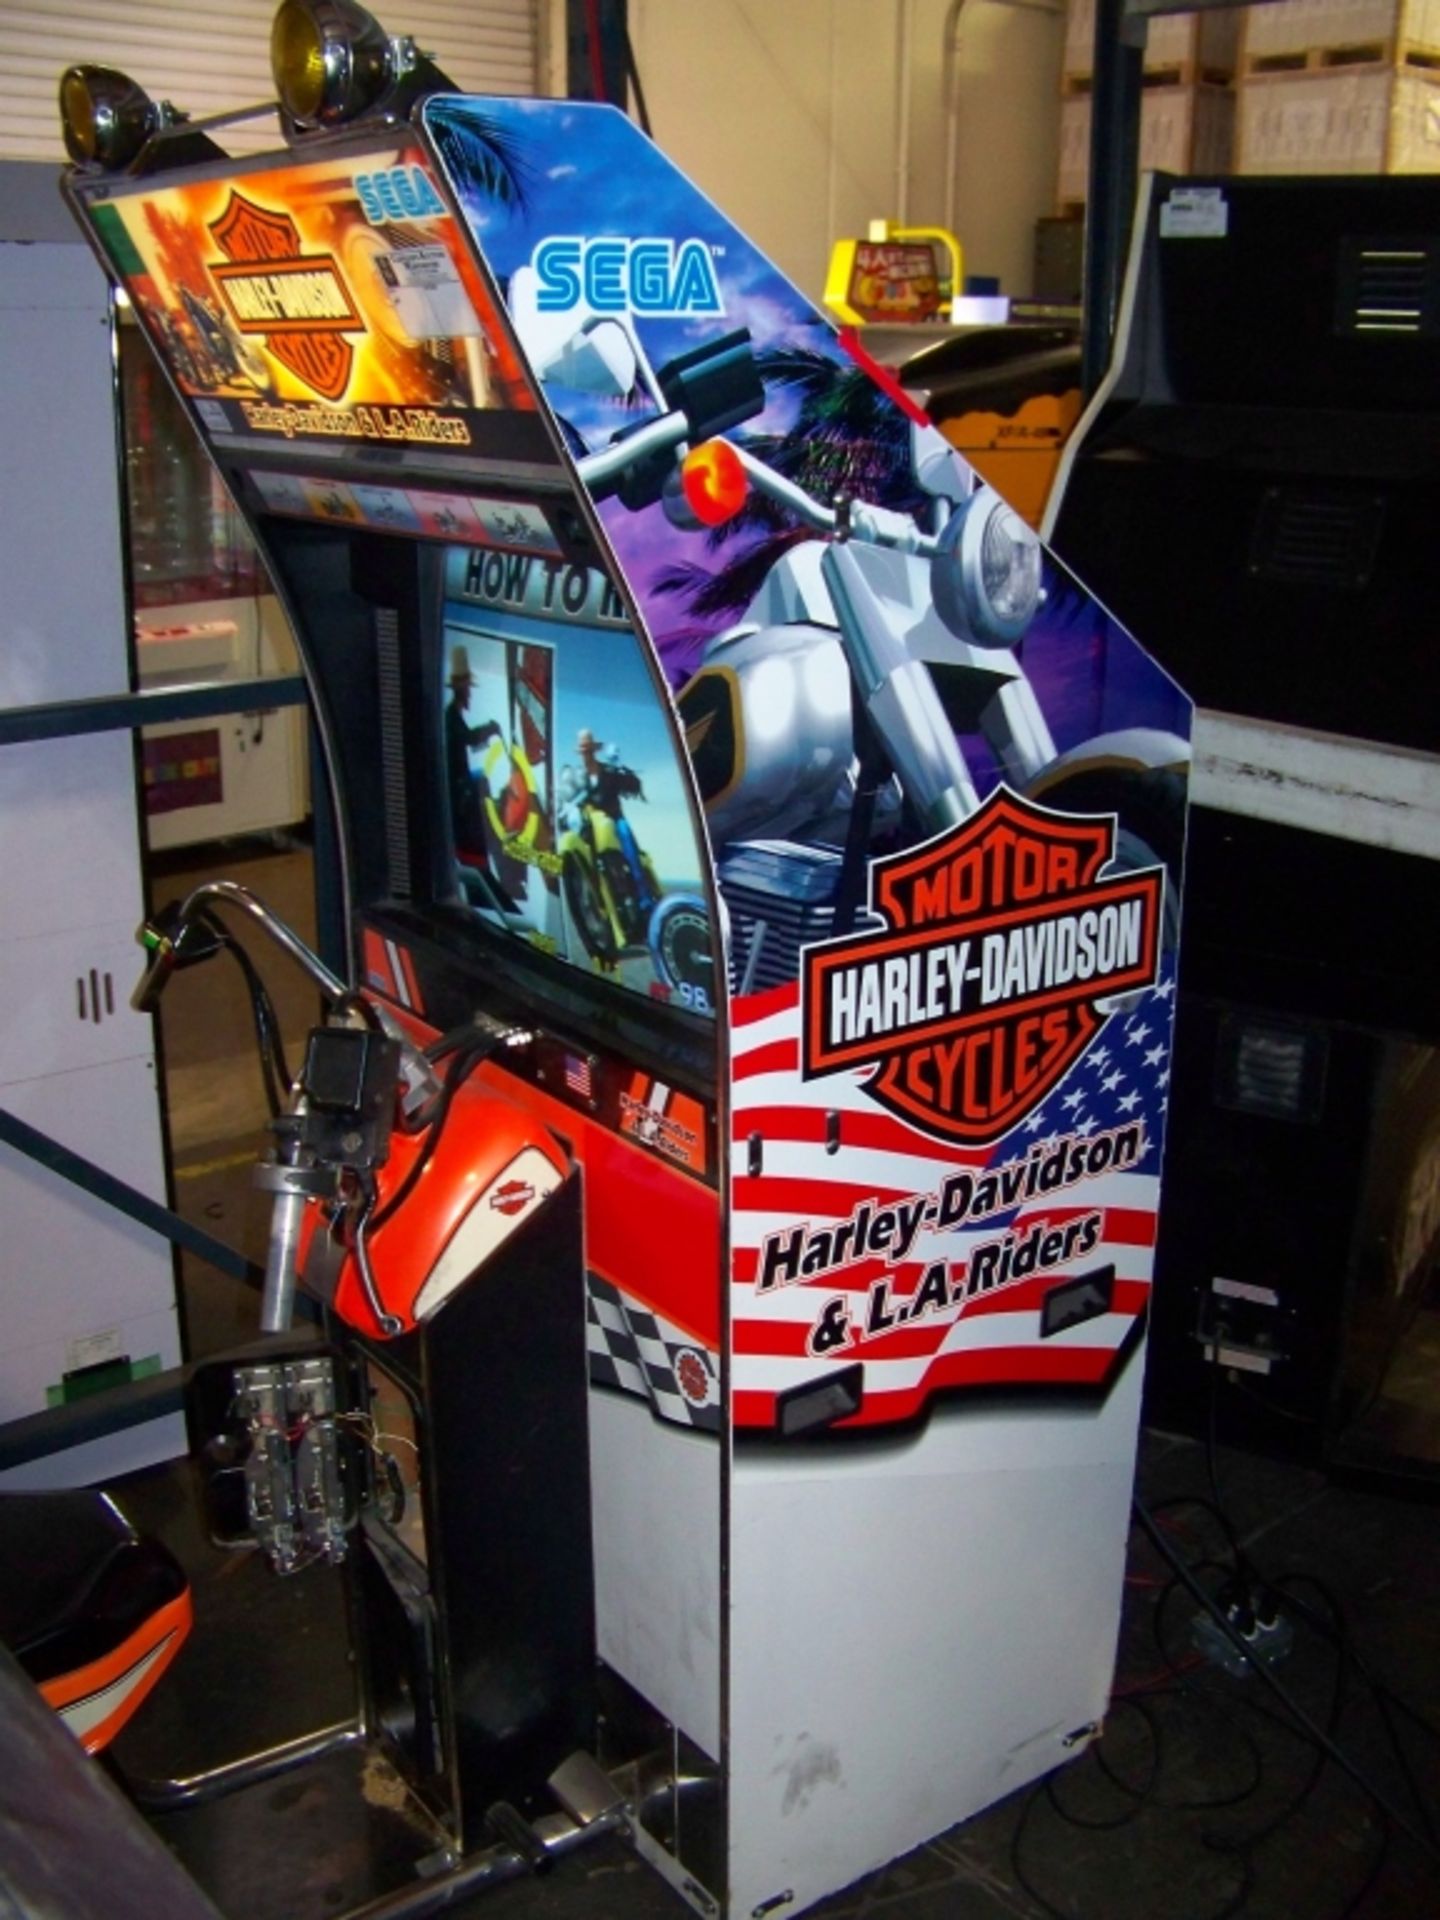 HARLEY DAVIDSON L.A. RIDERS RACING ARCADE SEGA Item is in used condition. Evidence of wear and - Image 4 of 5